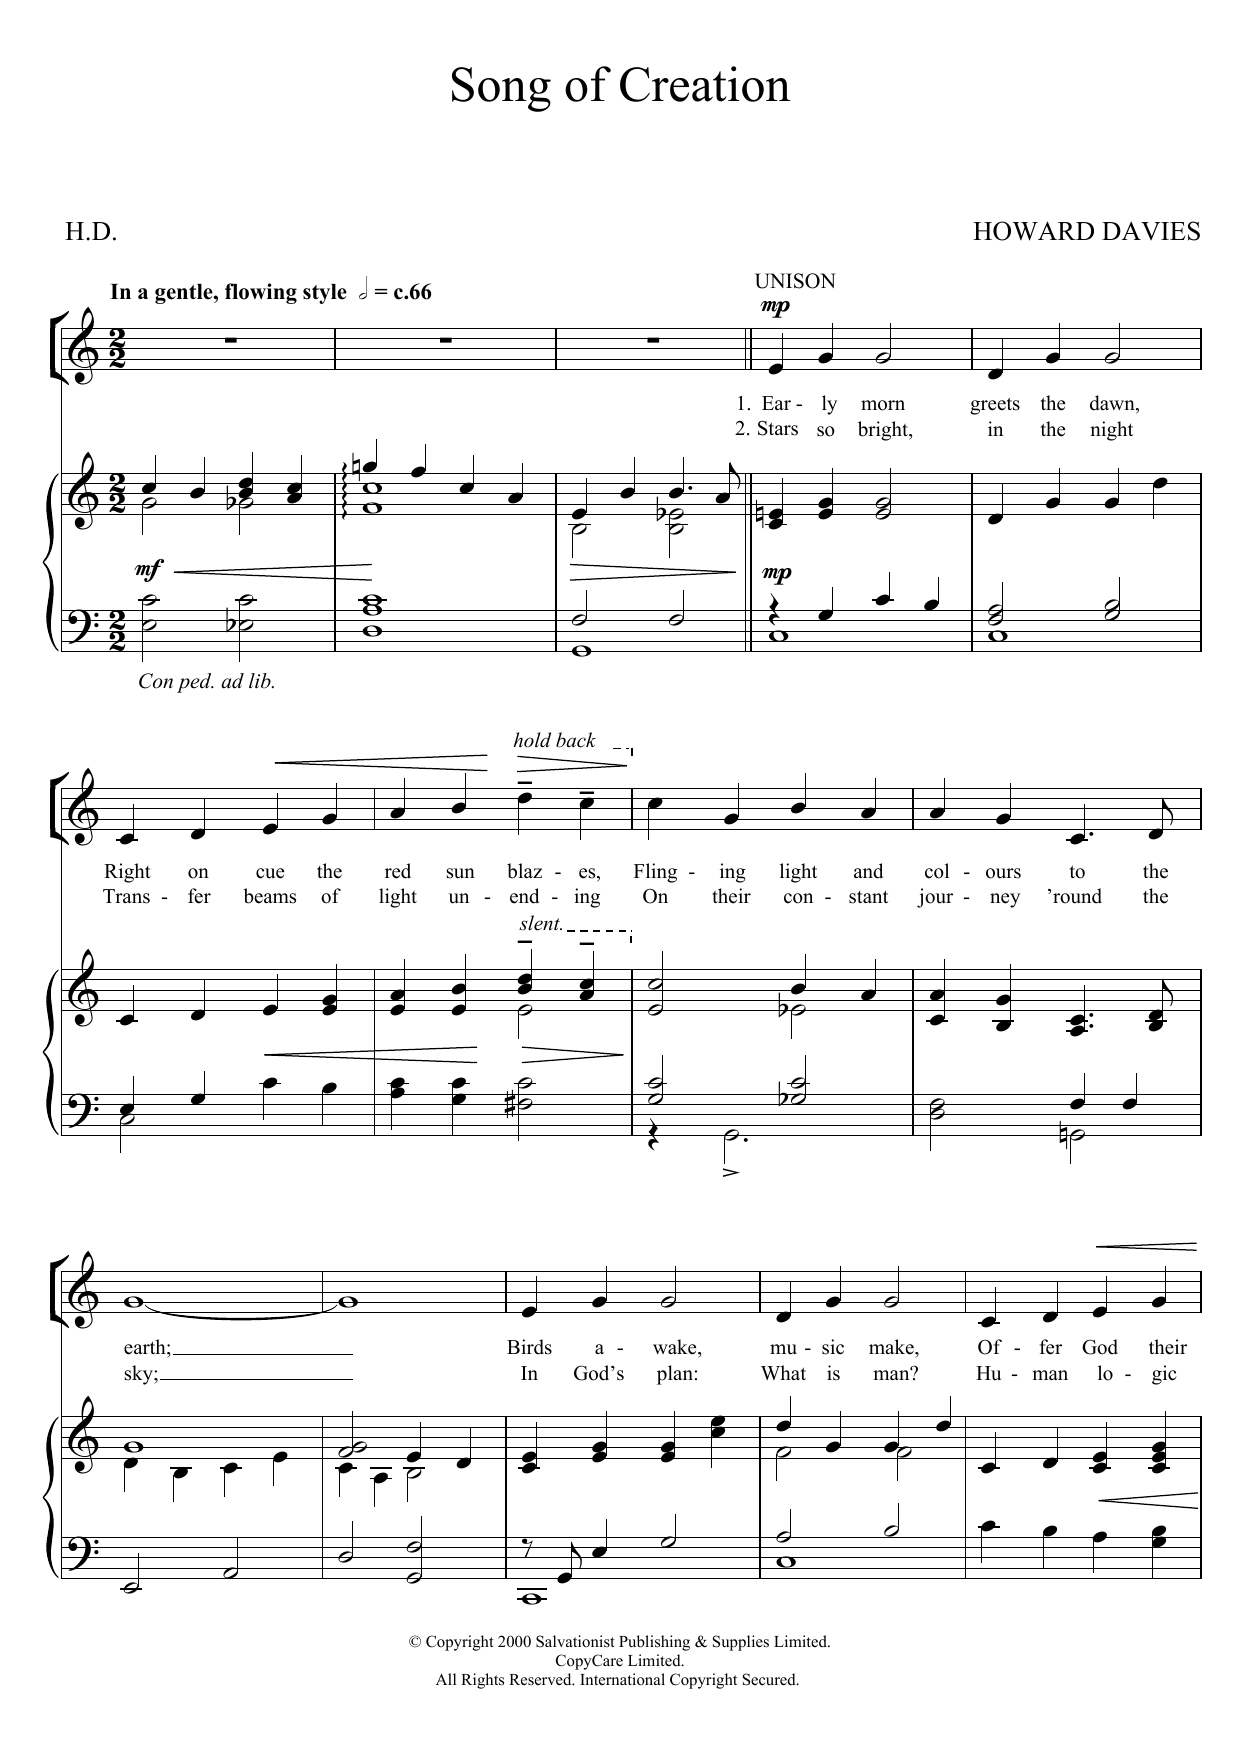 Download The Salvation Army Song Of Creation Sheet Music